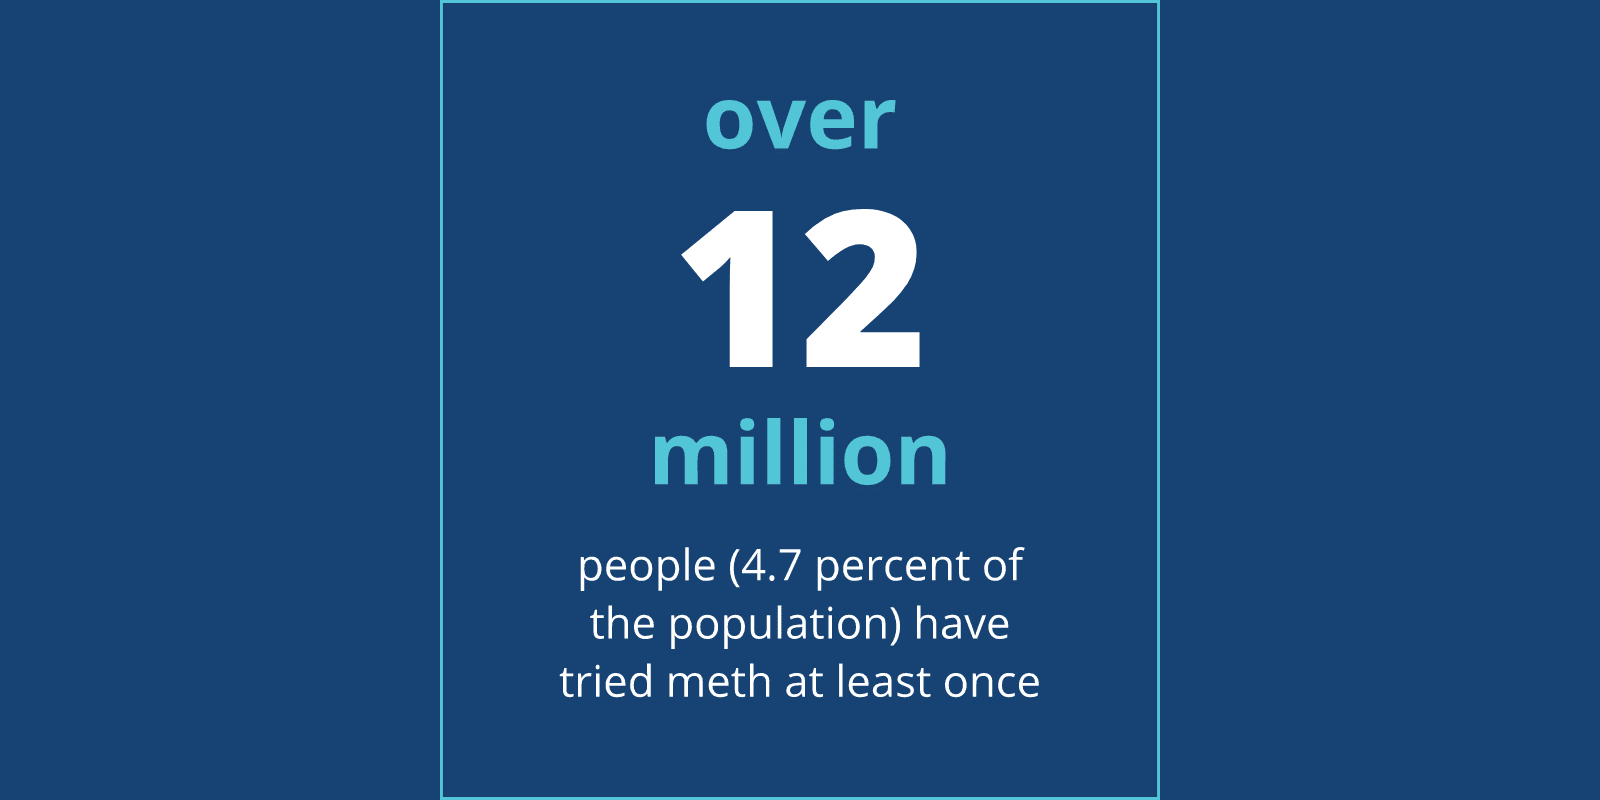 Over 12 million people(4.7 percent of the population) have tried meth at least once